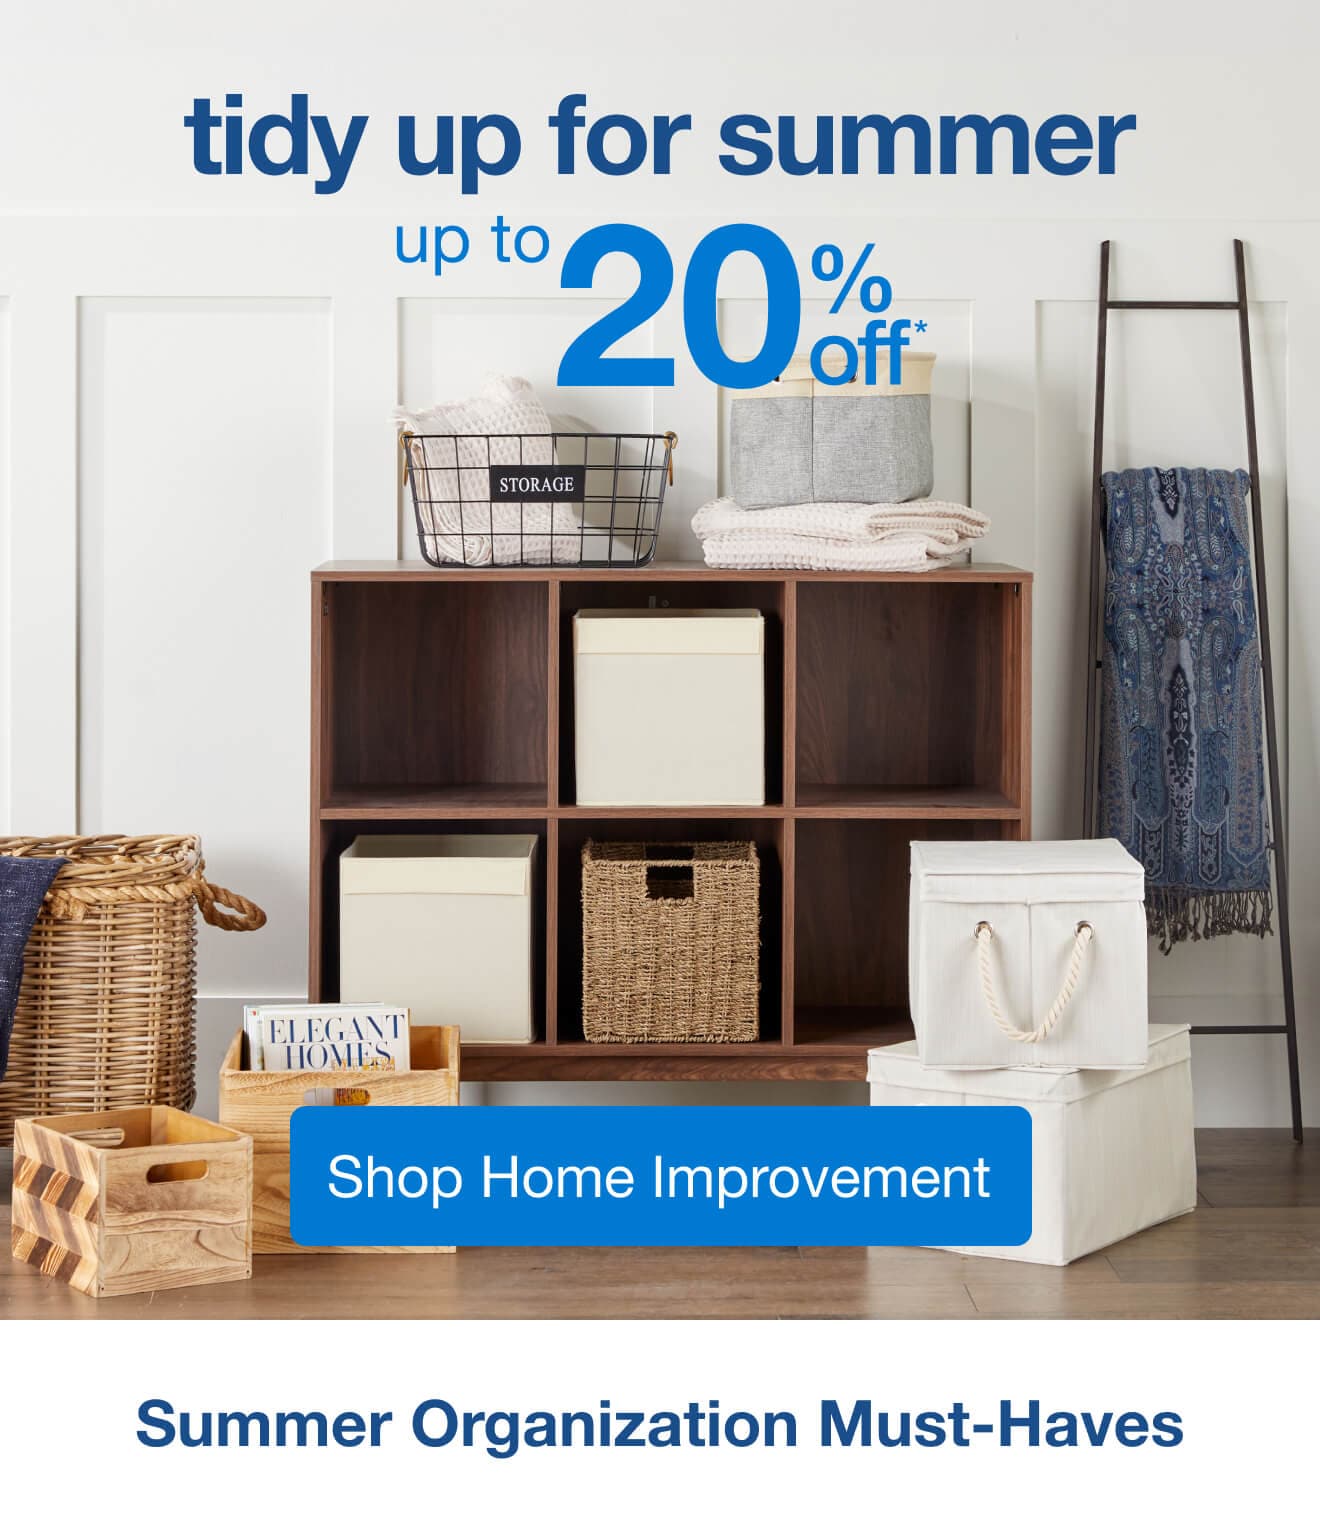 Summer Cleaning and Organizing - Shop Home Improvement